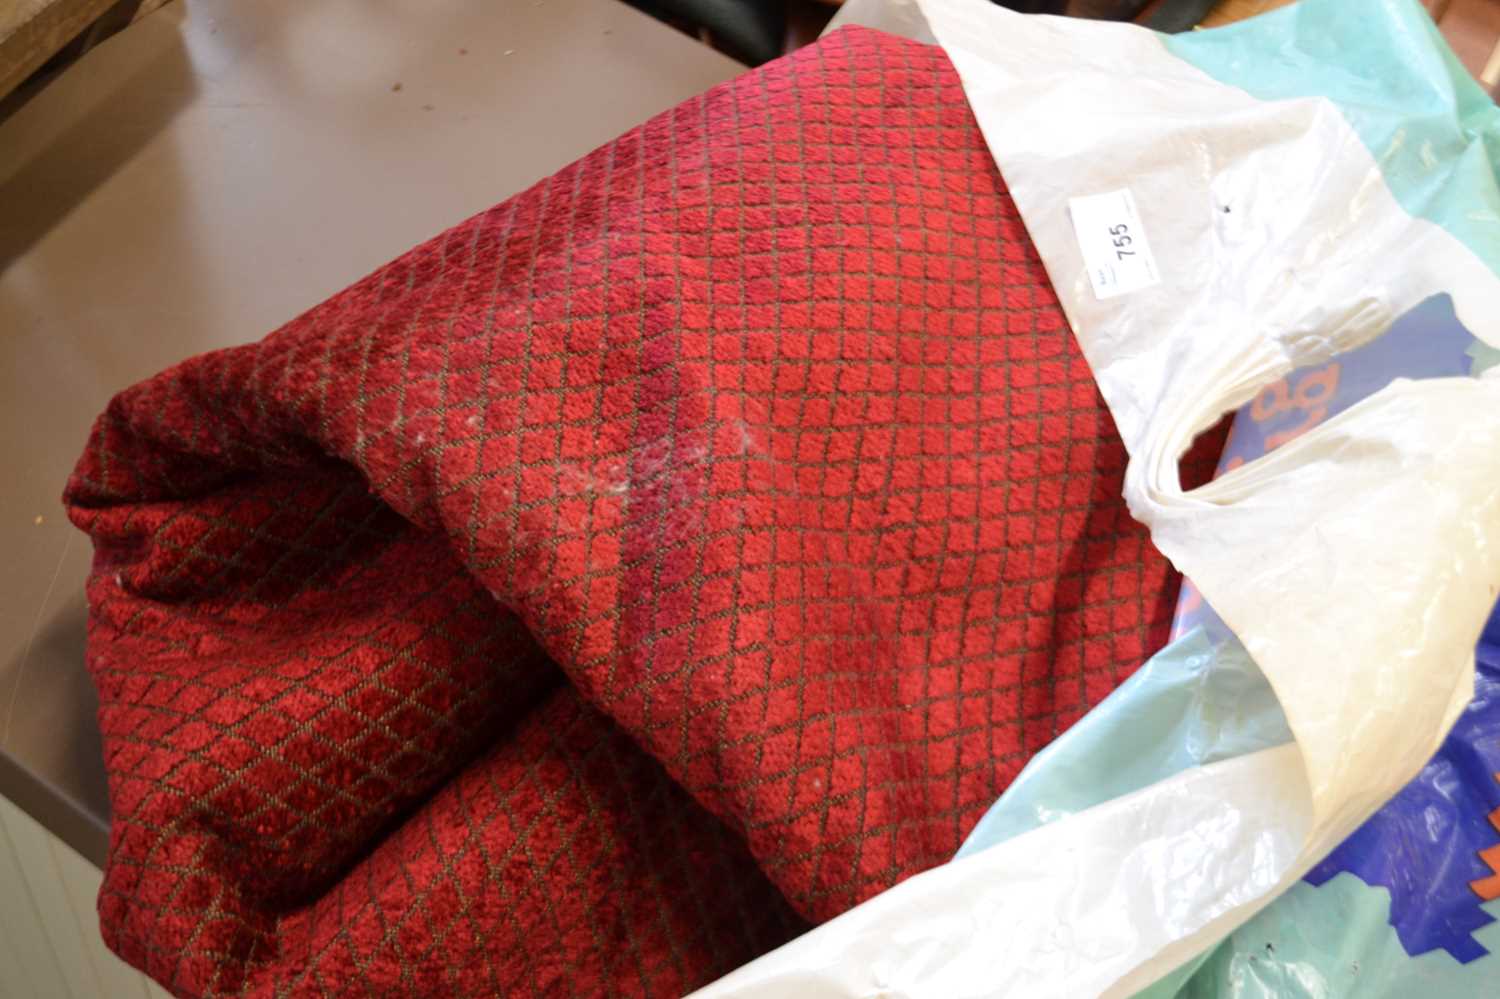 A quantity of red diamond patterned upholstery fabric